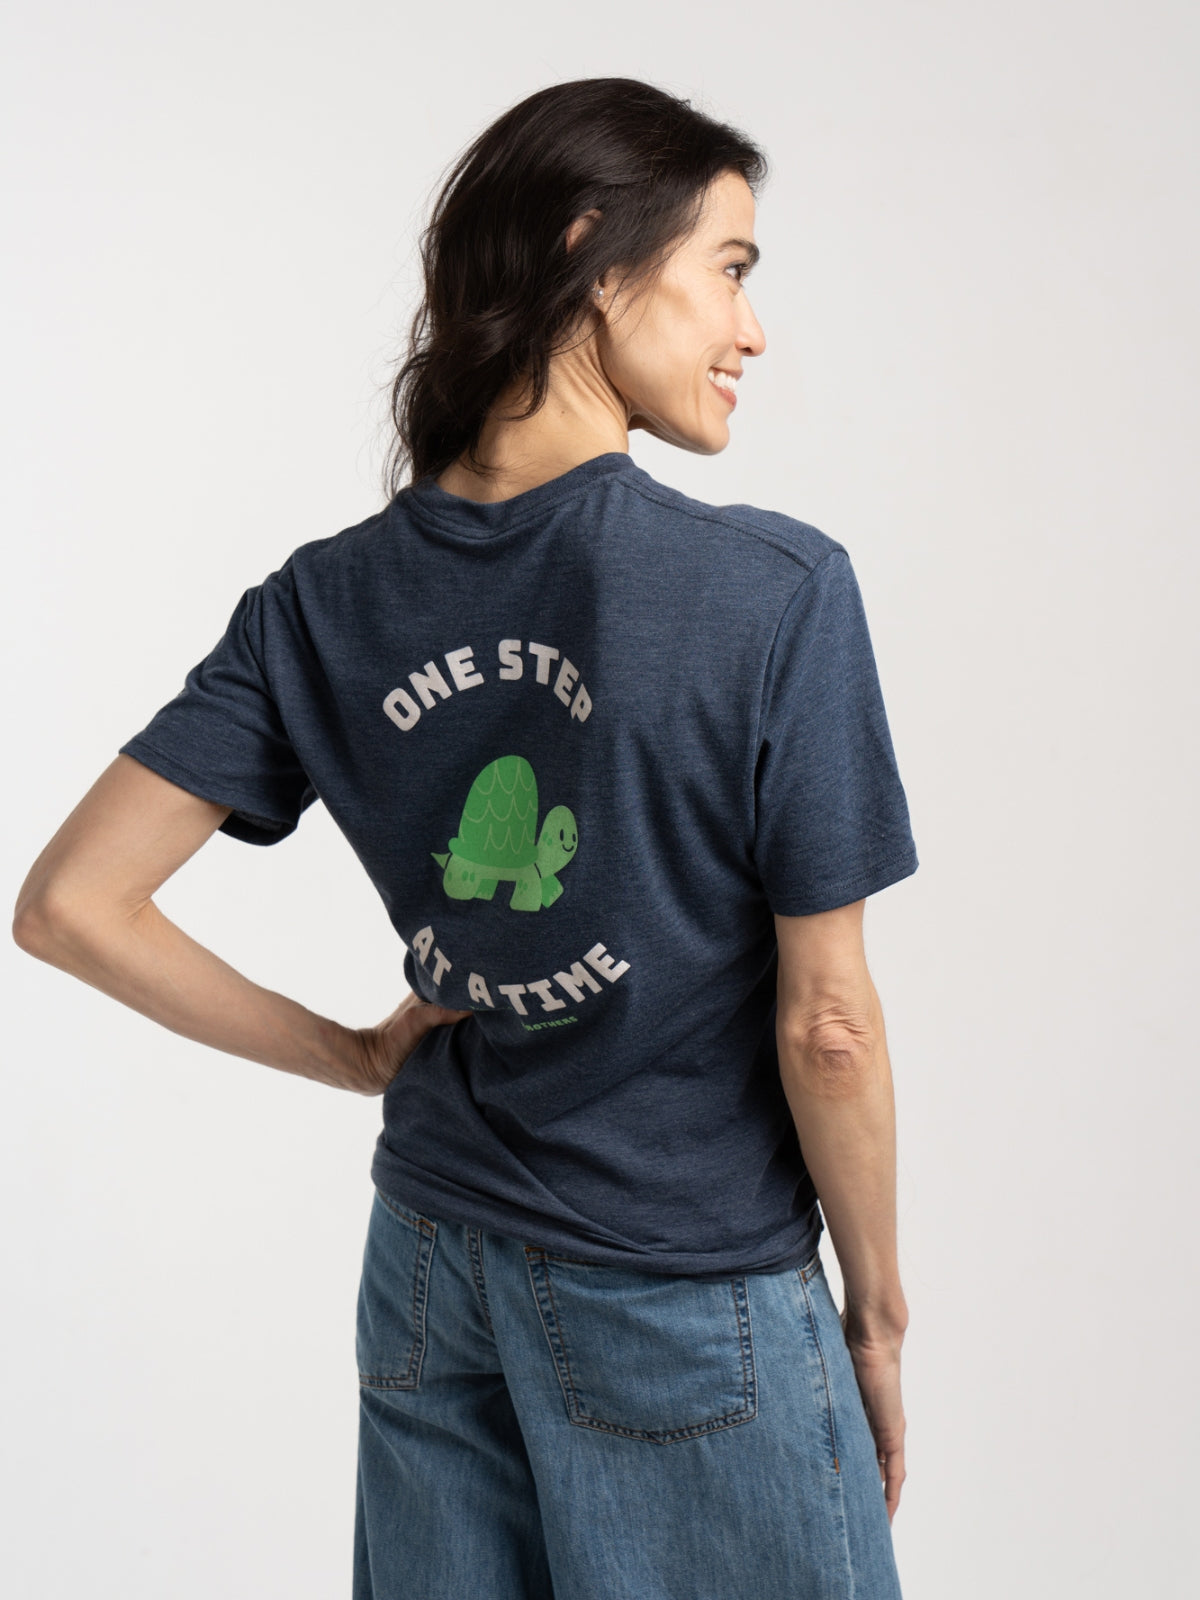 Two Blind Brothers - Womens Women's "One Step at a Time" Graphic Crewneck Navy